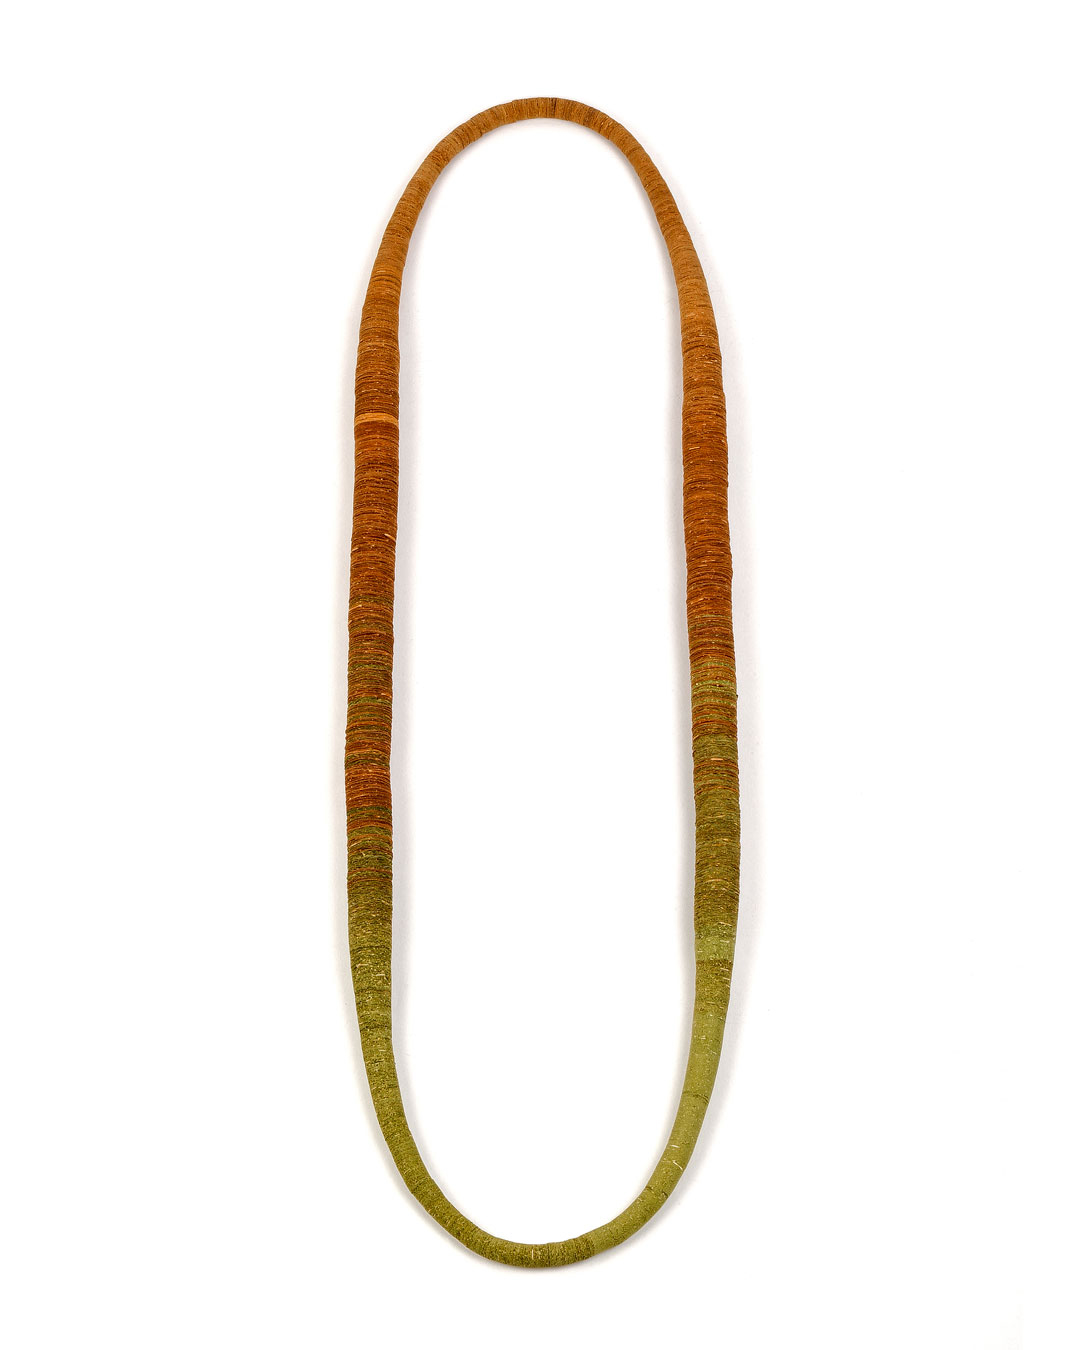 Carmen Hauser, Ahorn (Maple), 2020, necklace; maple leaves, yarn, 600 x 130 x 22 mm, €2100